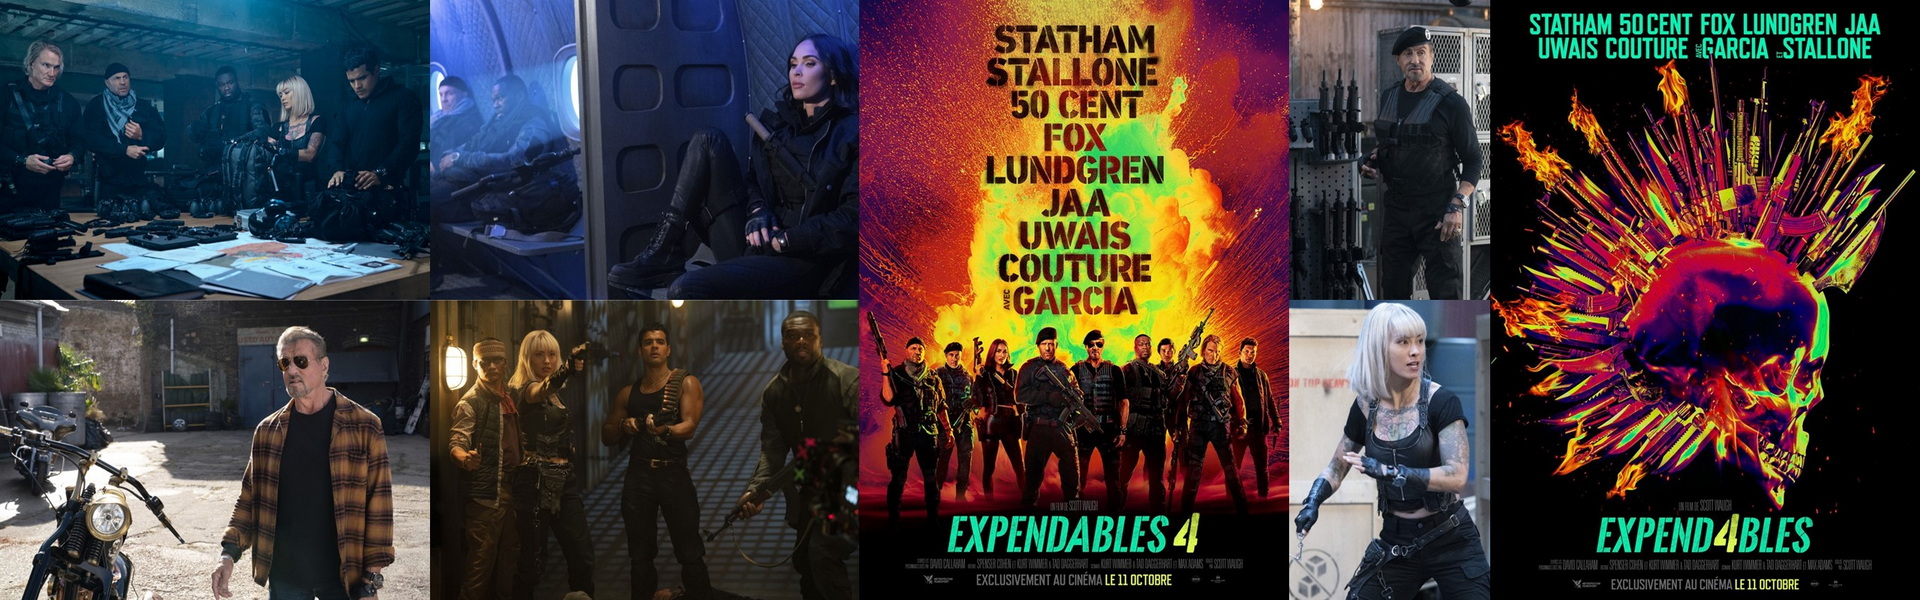 EXPENDABLES 4 / EXPEND4BLES